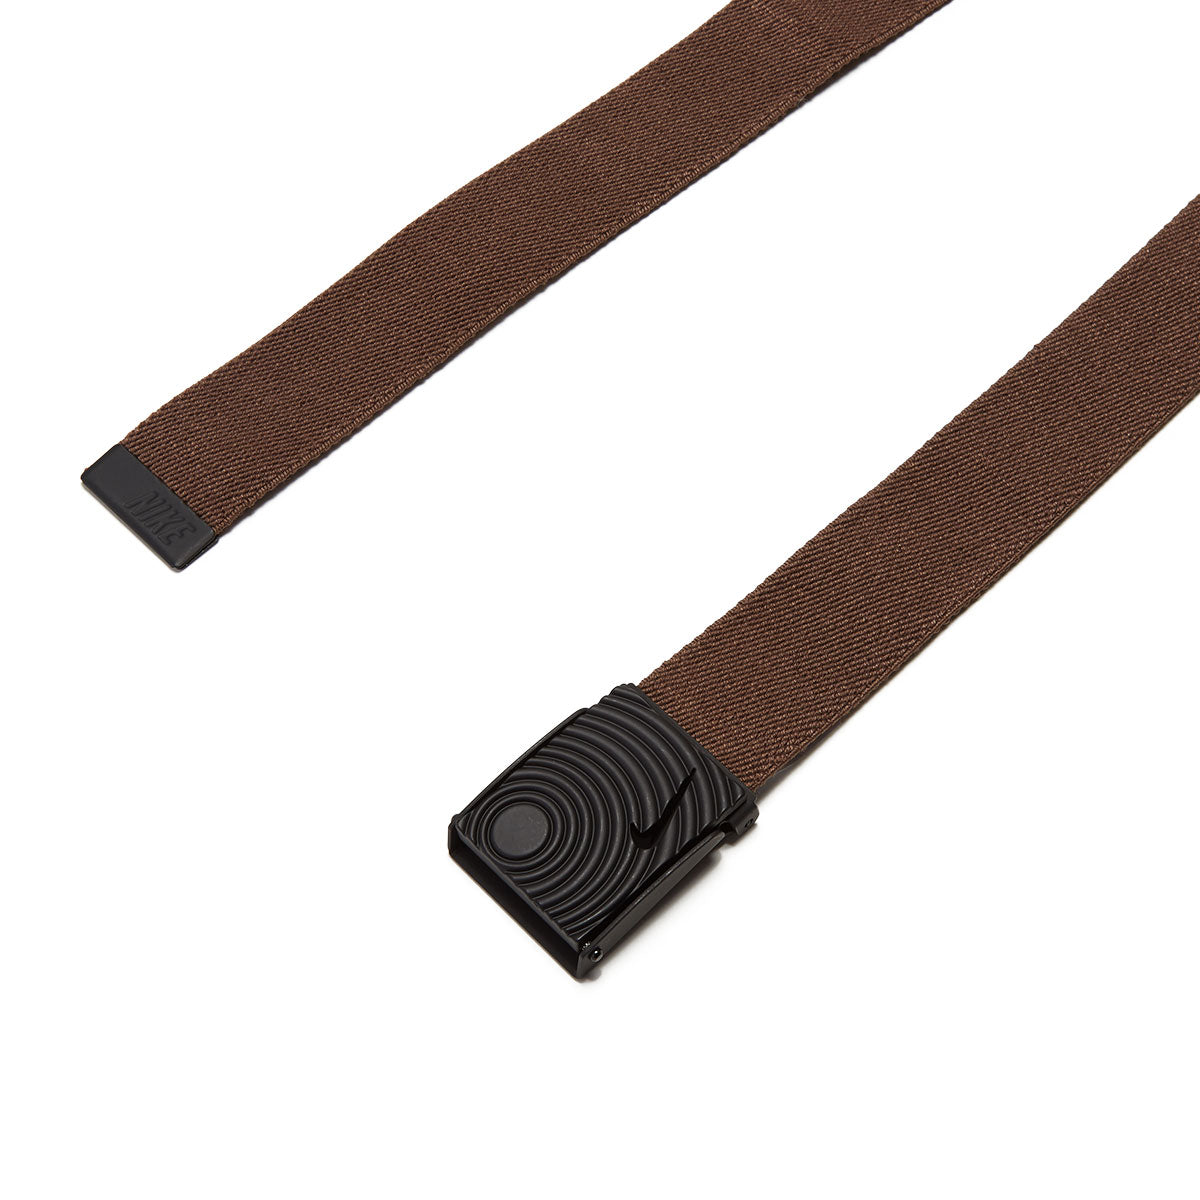 Nike Outsole Stretch Web Belt - Brown image 2